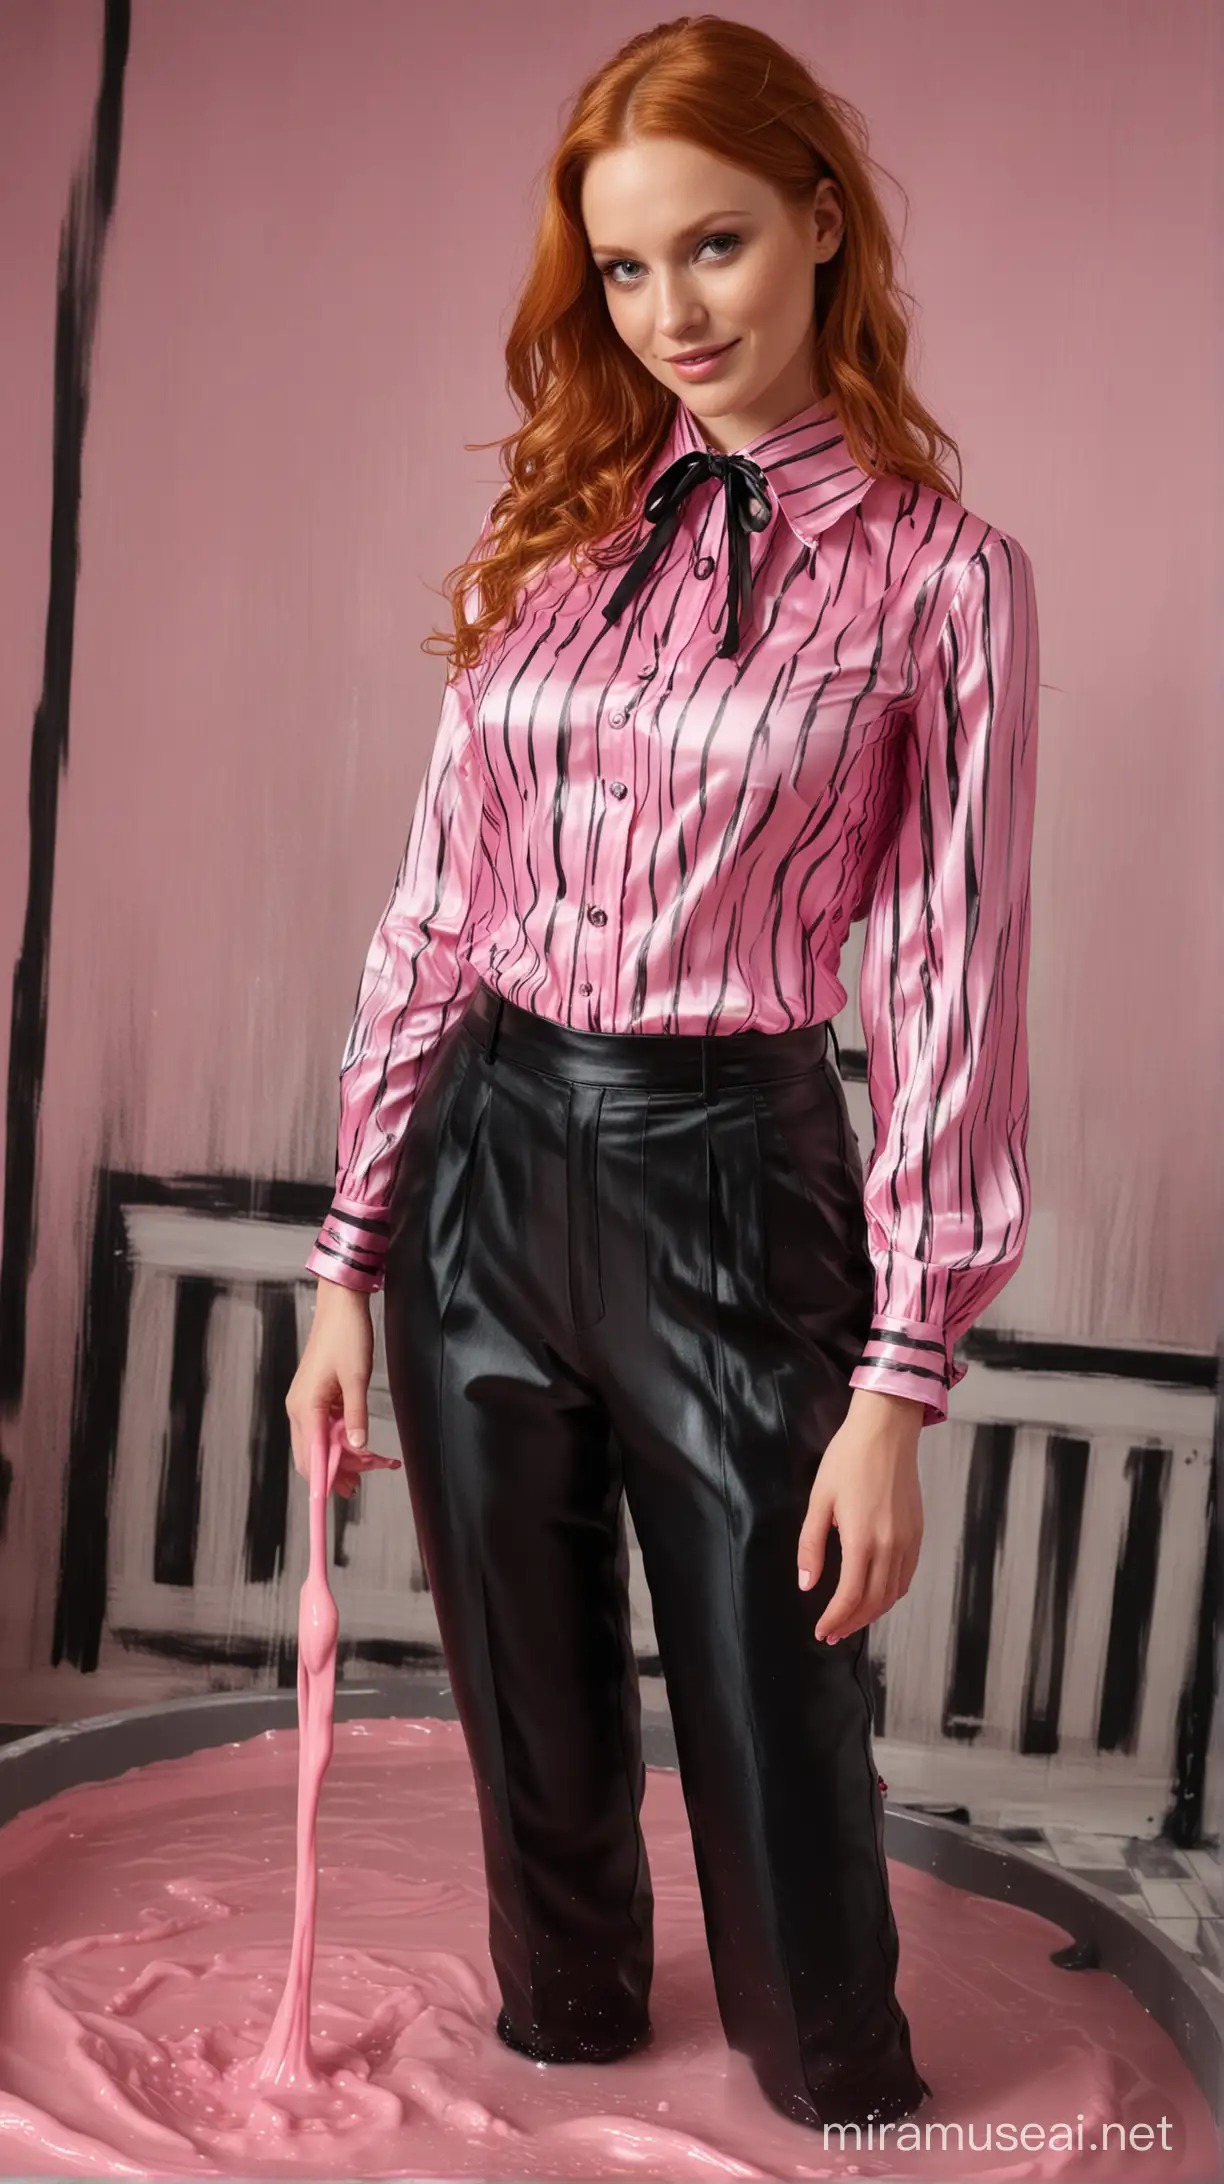 Realistic colourful scene female ample breasts beatefull face nice smile as elegant long ginger hair in shinig wet satin blouses black and pink stripes whit a stiffened collar , wet satin black and pink long pants, great attention to additional elements such as material texture well-lit composition, full body pose stand big slime columne as french maid pours liquid on herself